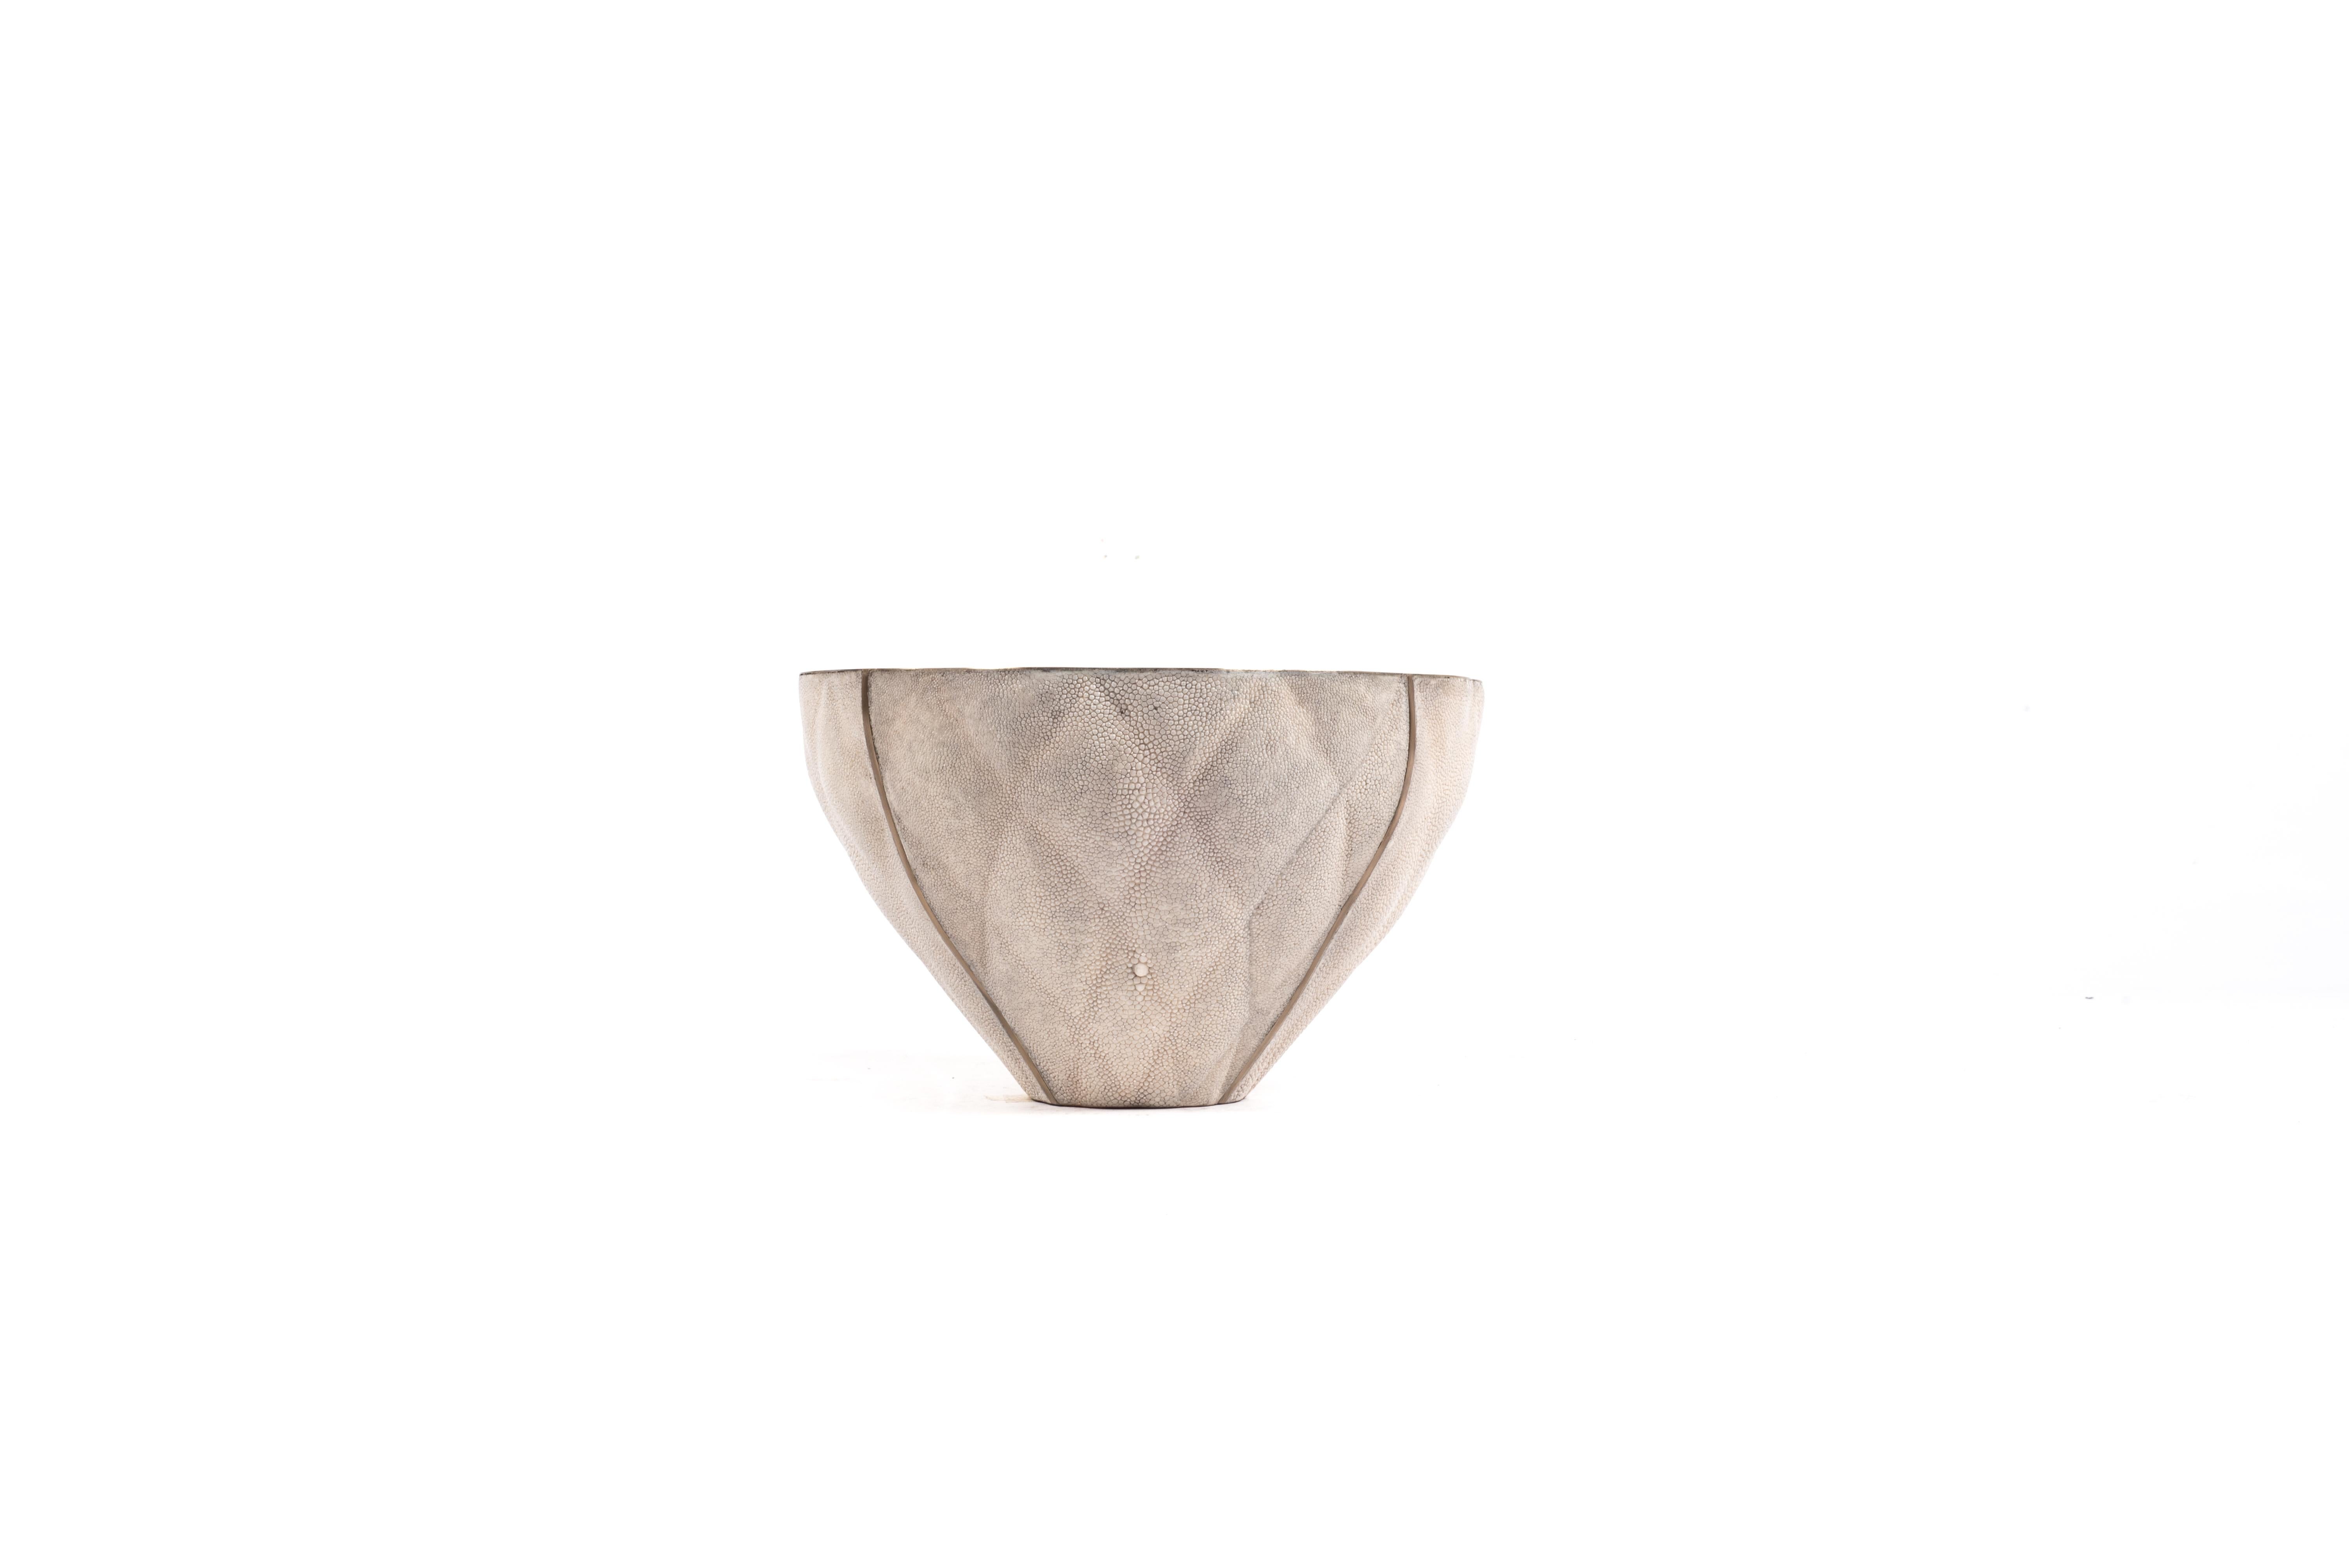 The Coco bowl is a sophisticated and luxurious accent piece with it’s exquisite quilted details. The exterior is inlaid in cream shagreen and the interior in bronze-patina brass. This listing is for the small size, available in a small size and